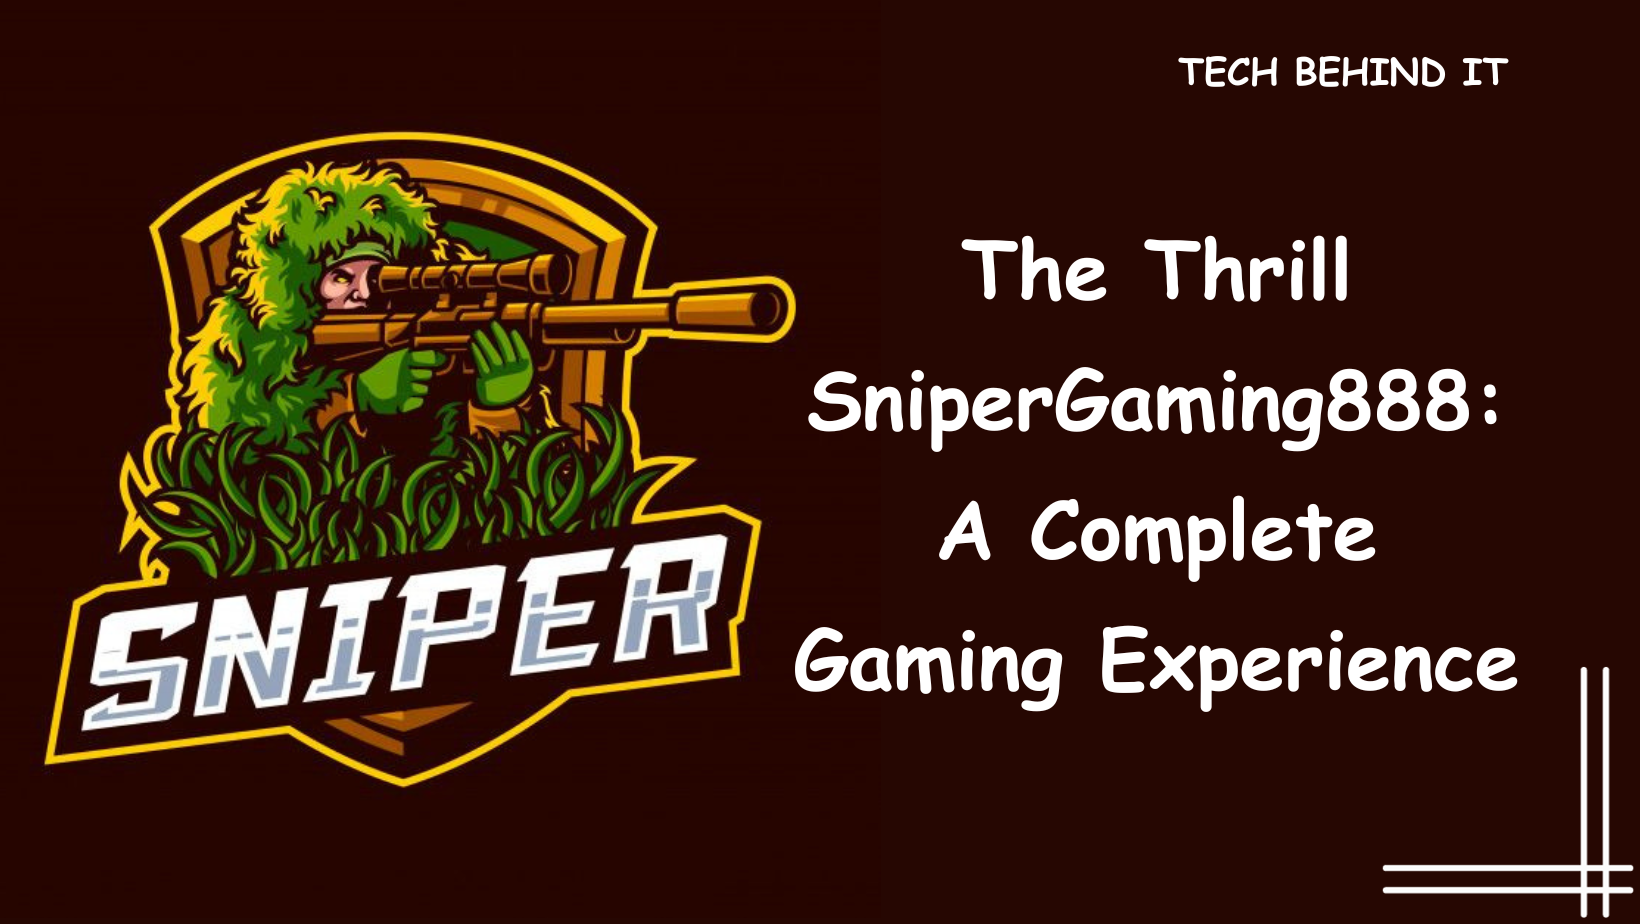 The Thrill SniperGaming888: A Complete Gaming Experience